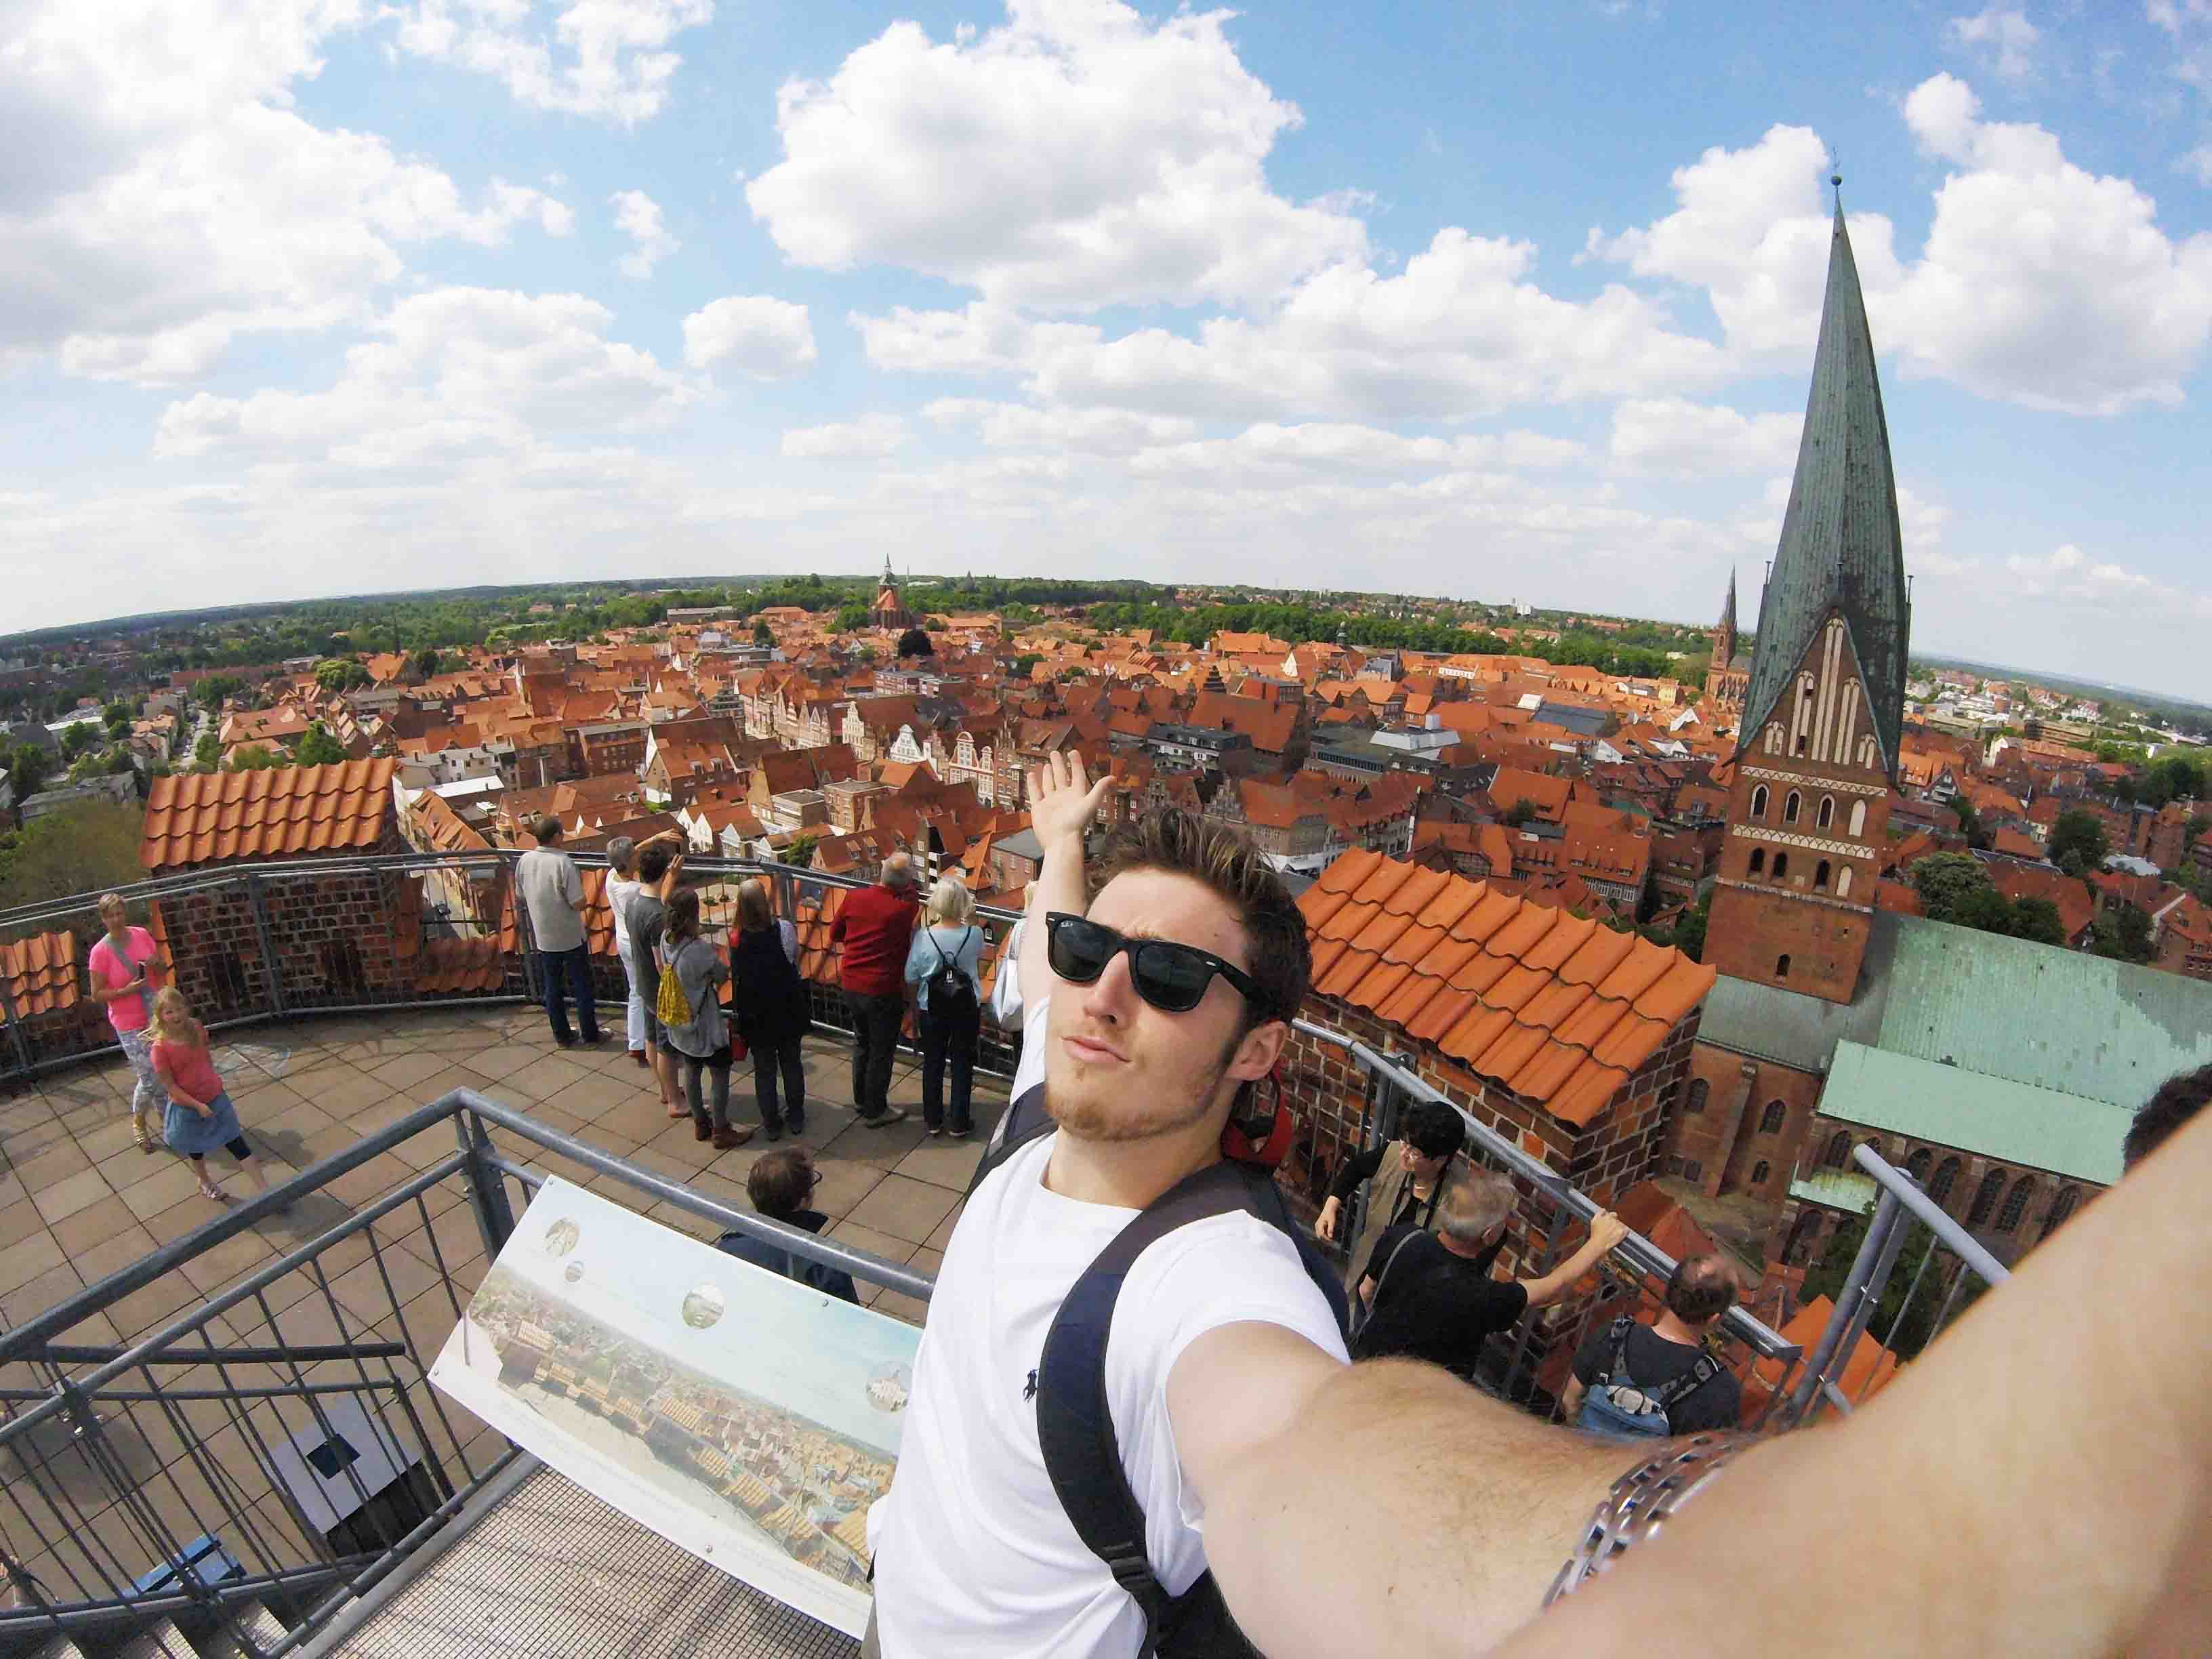 Student overlooking the city of Lüneburg, Germany.